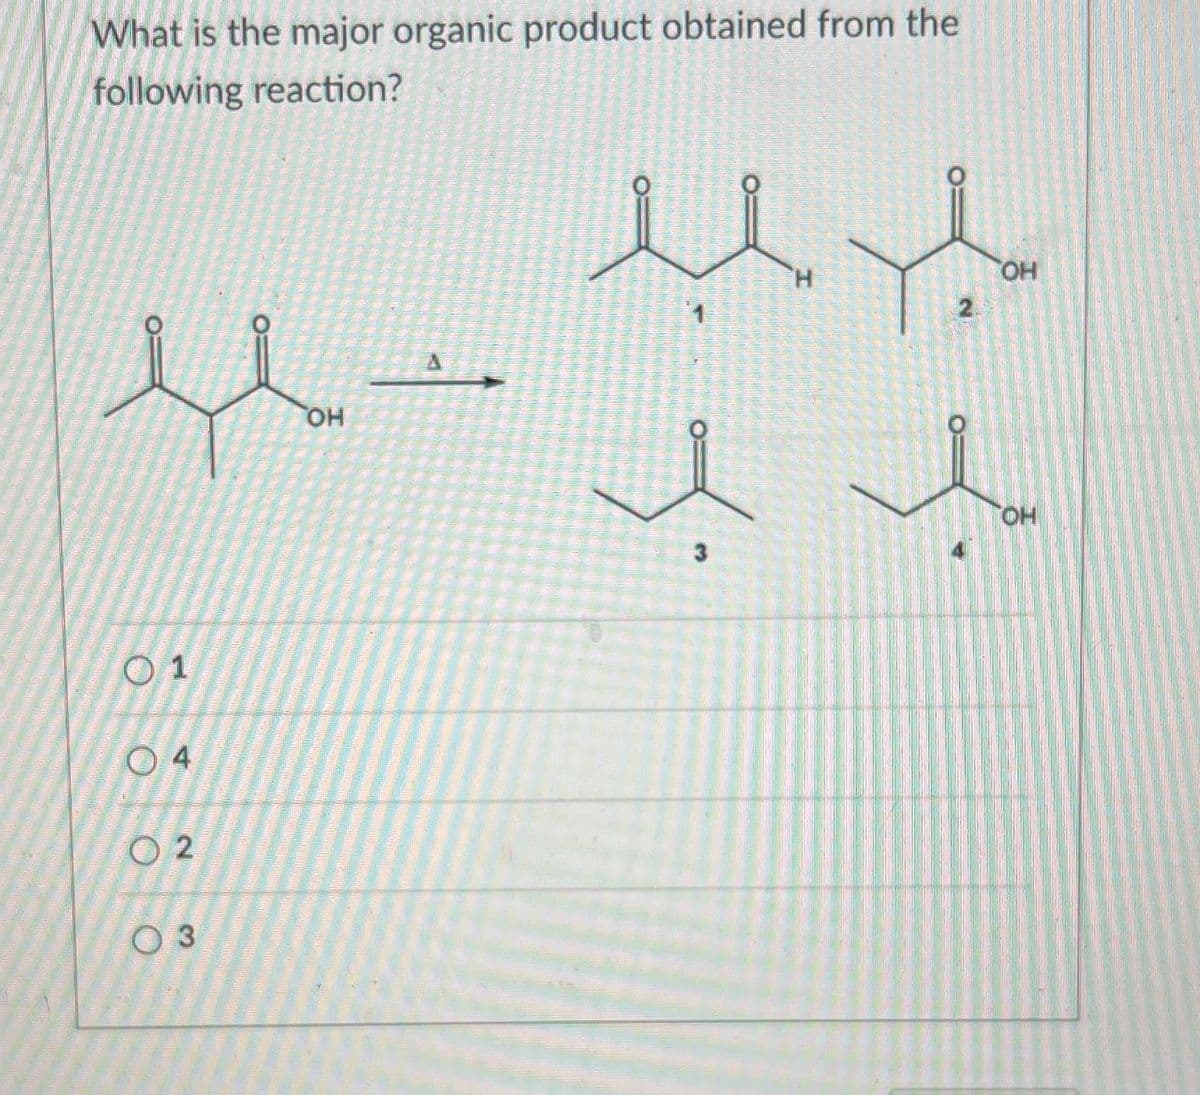 What is the major organic product obtained from the
following reaction?
01
02
03
OH
OH
OH
3